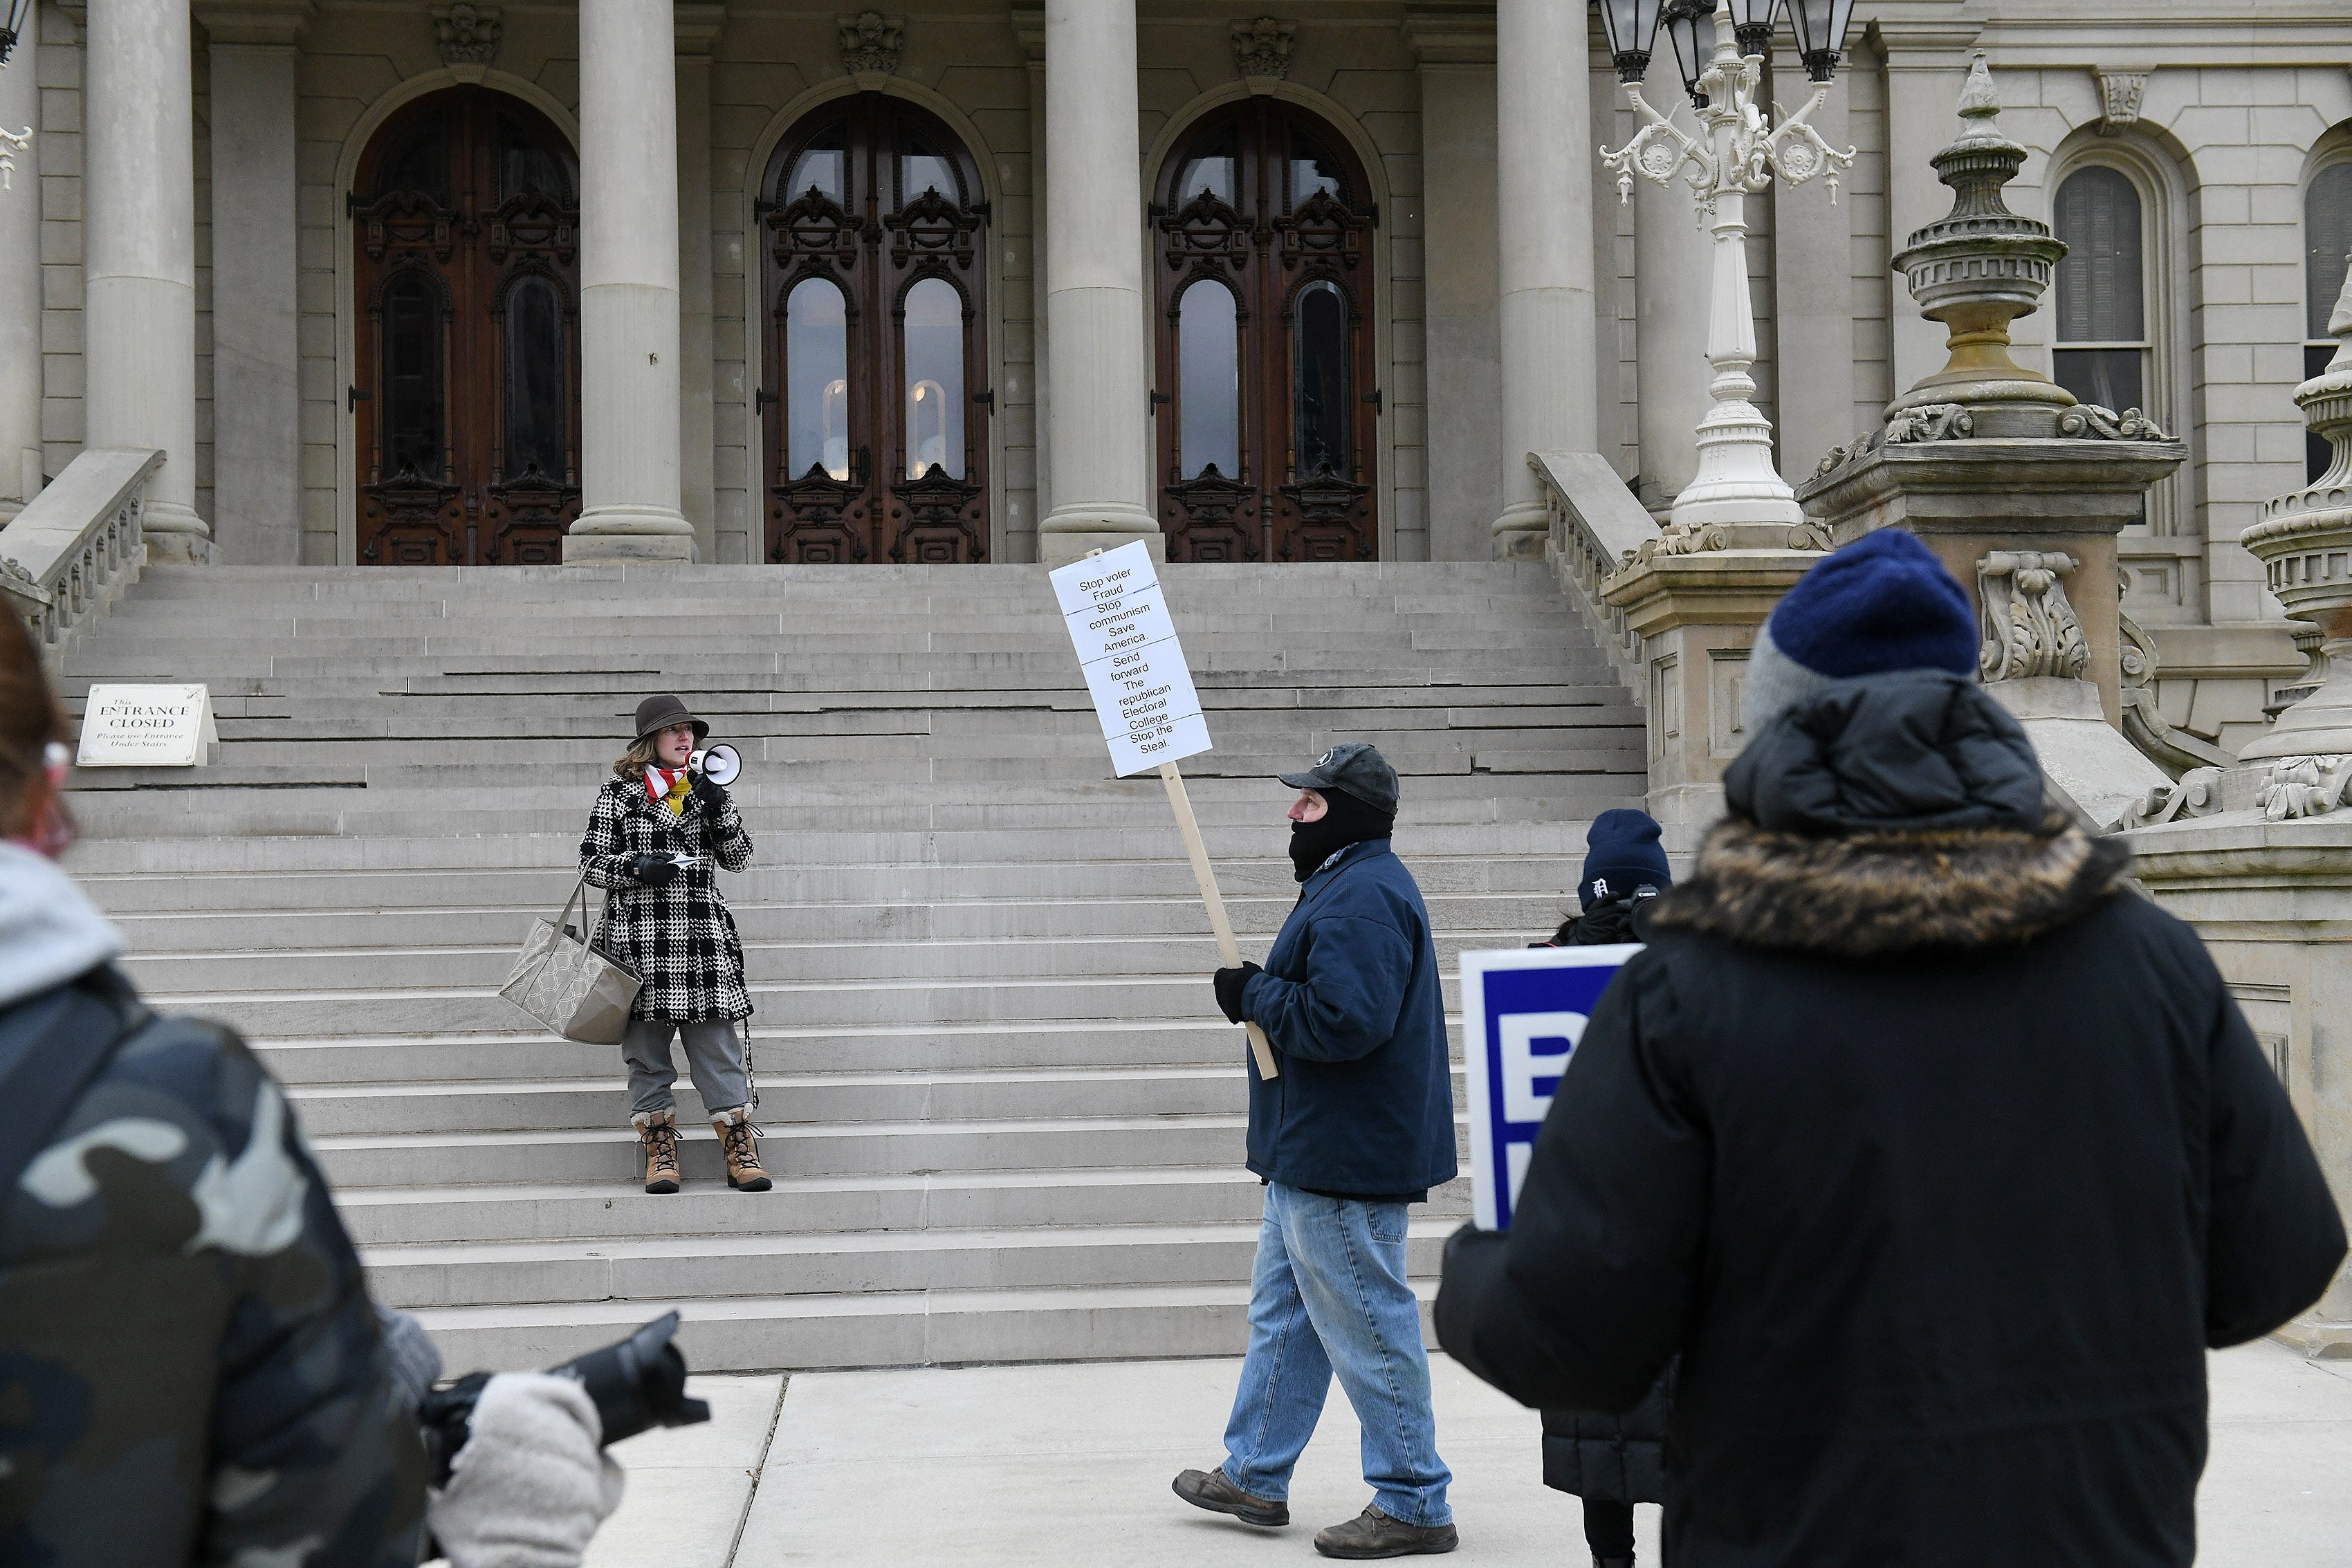 Candace Cook, 33, of Perry reads the Declaration of Independence on the steps of the Michigan State Capitol in Lansing, Mich. on Dec. 14, 2020.   The electors are casting their votes today at the capitol for the president and vice president.